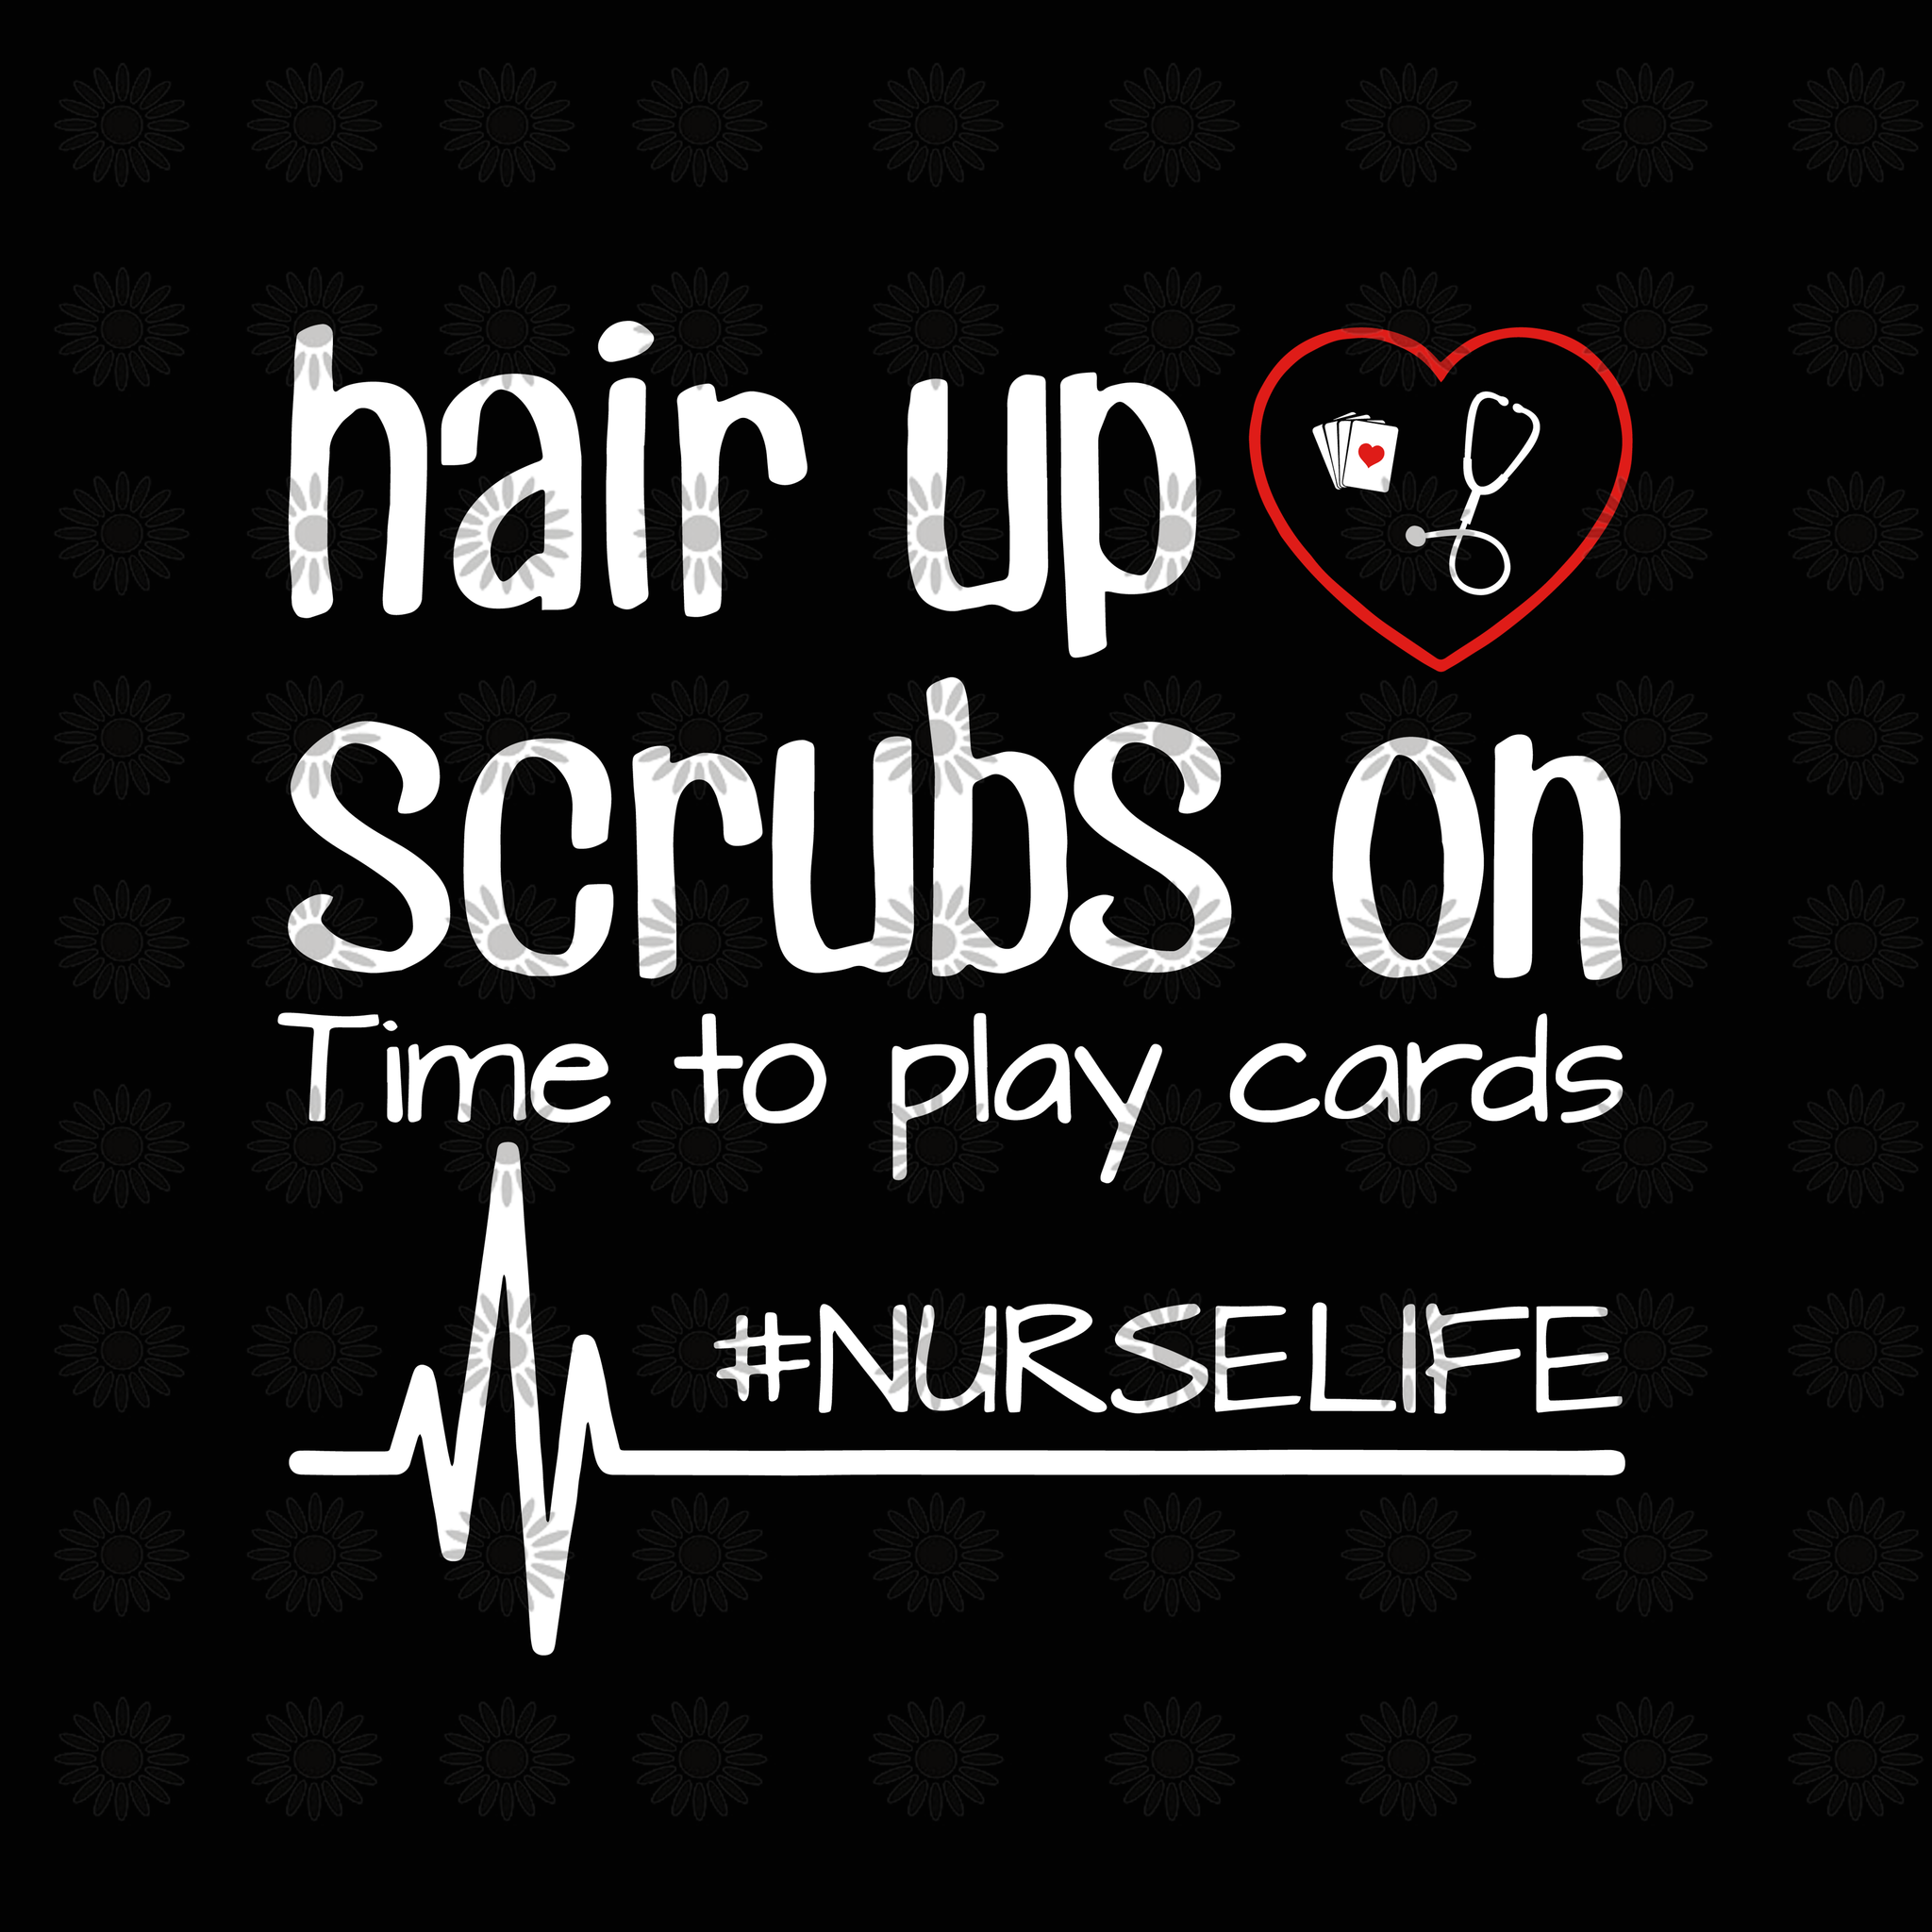 Hair up scrubs on time to play cards svg, nurselife svg, nurse svg, funny quotes svg, png, eps, dxf file